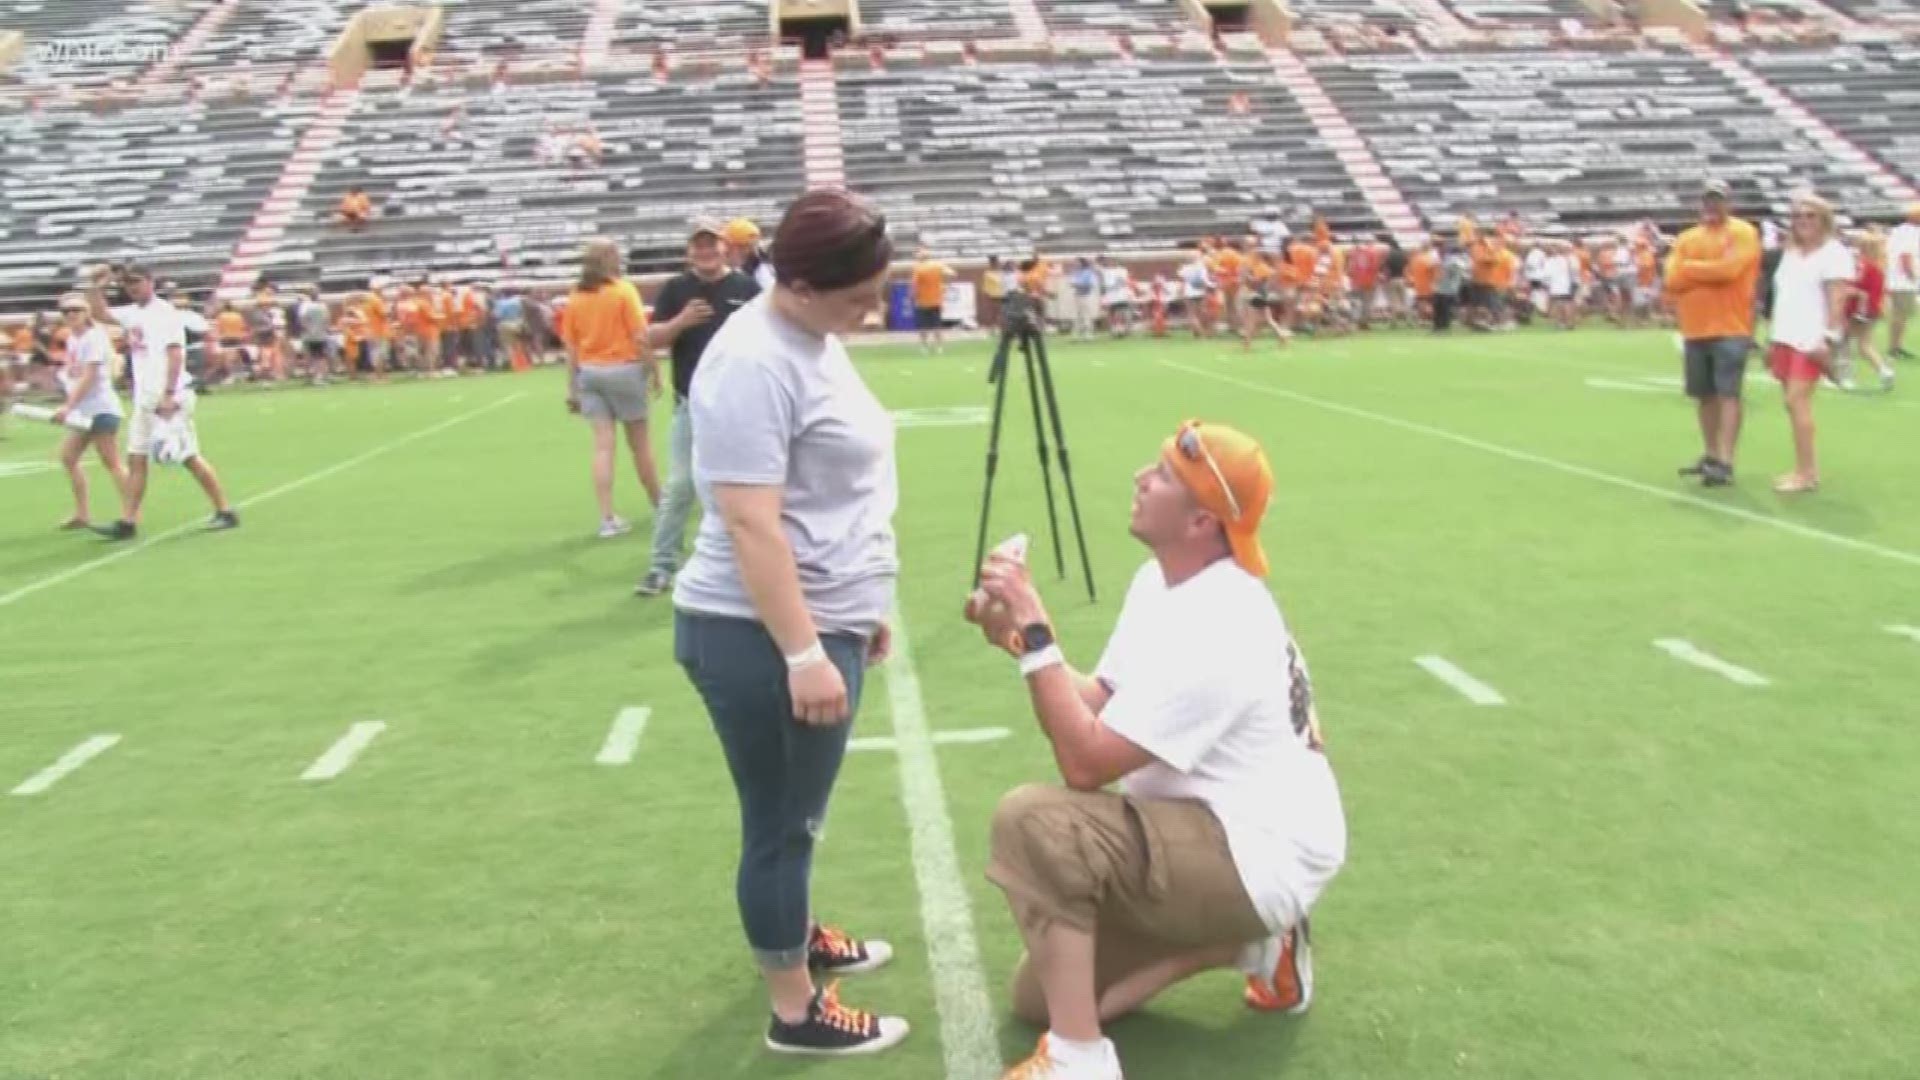 At UT's Fan Day, a Tennessee fan asked his girlfriend to marry him on the 50 yard line at Neyland Stadium